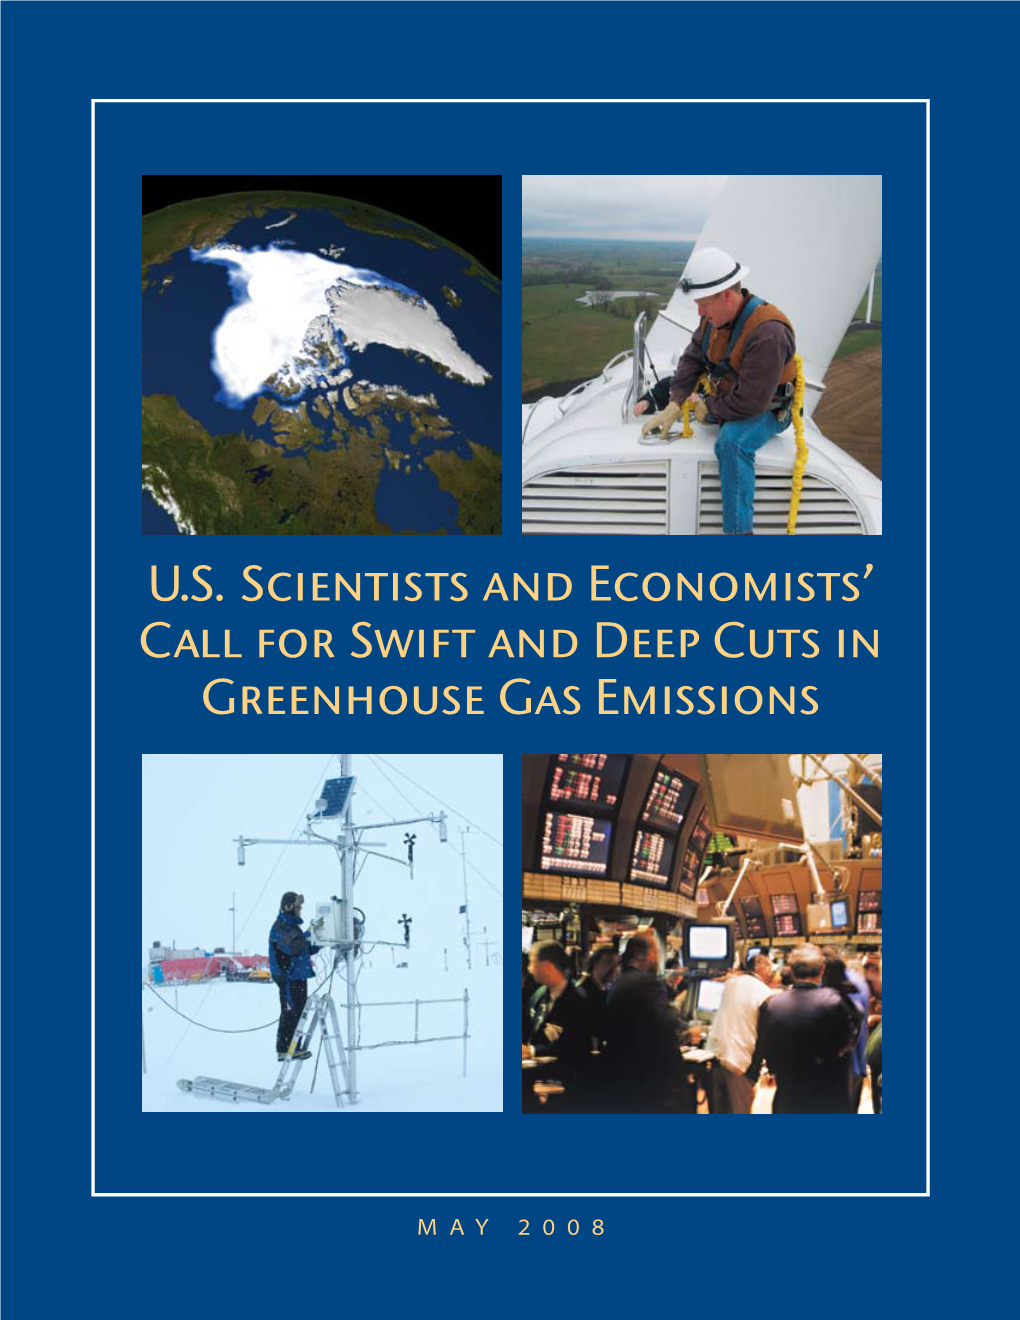 U.S. Scientists and Economists' Call for Swift and Deep Cuts In